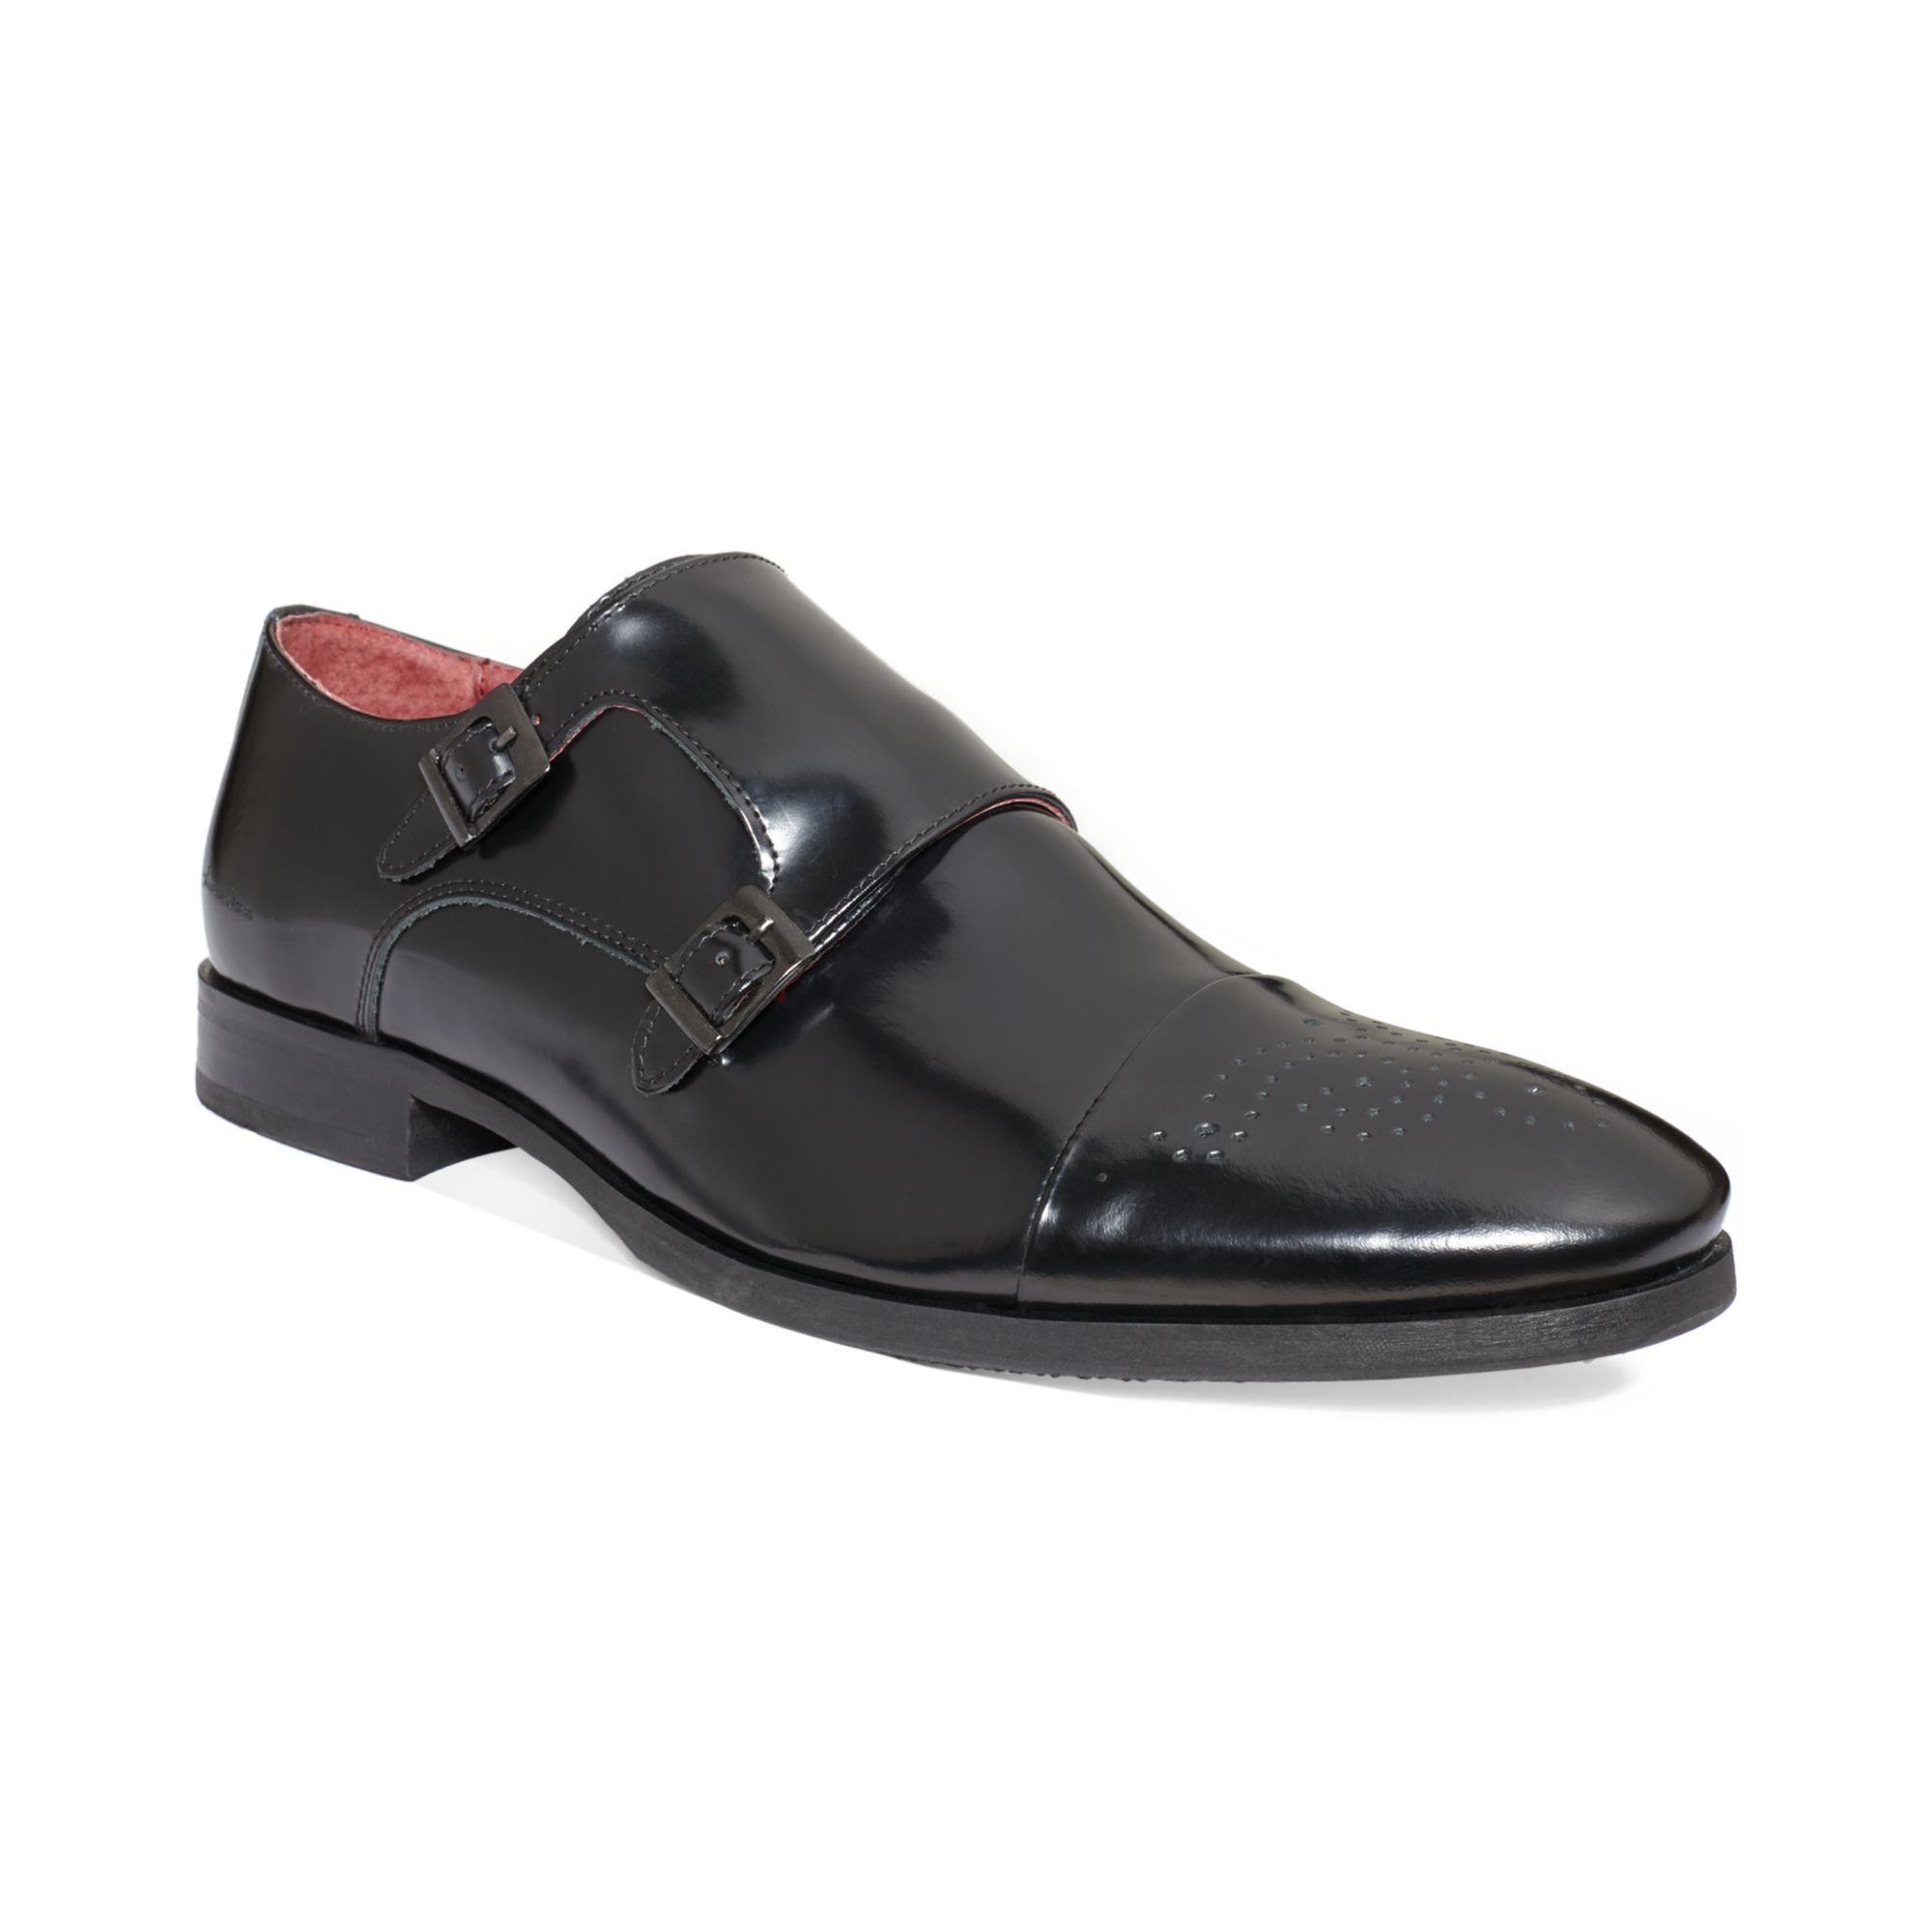 Lyst - Kenneth Cole Dotted Line Leather Monk Strap Shoes in Black for Men